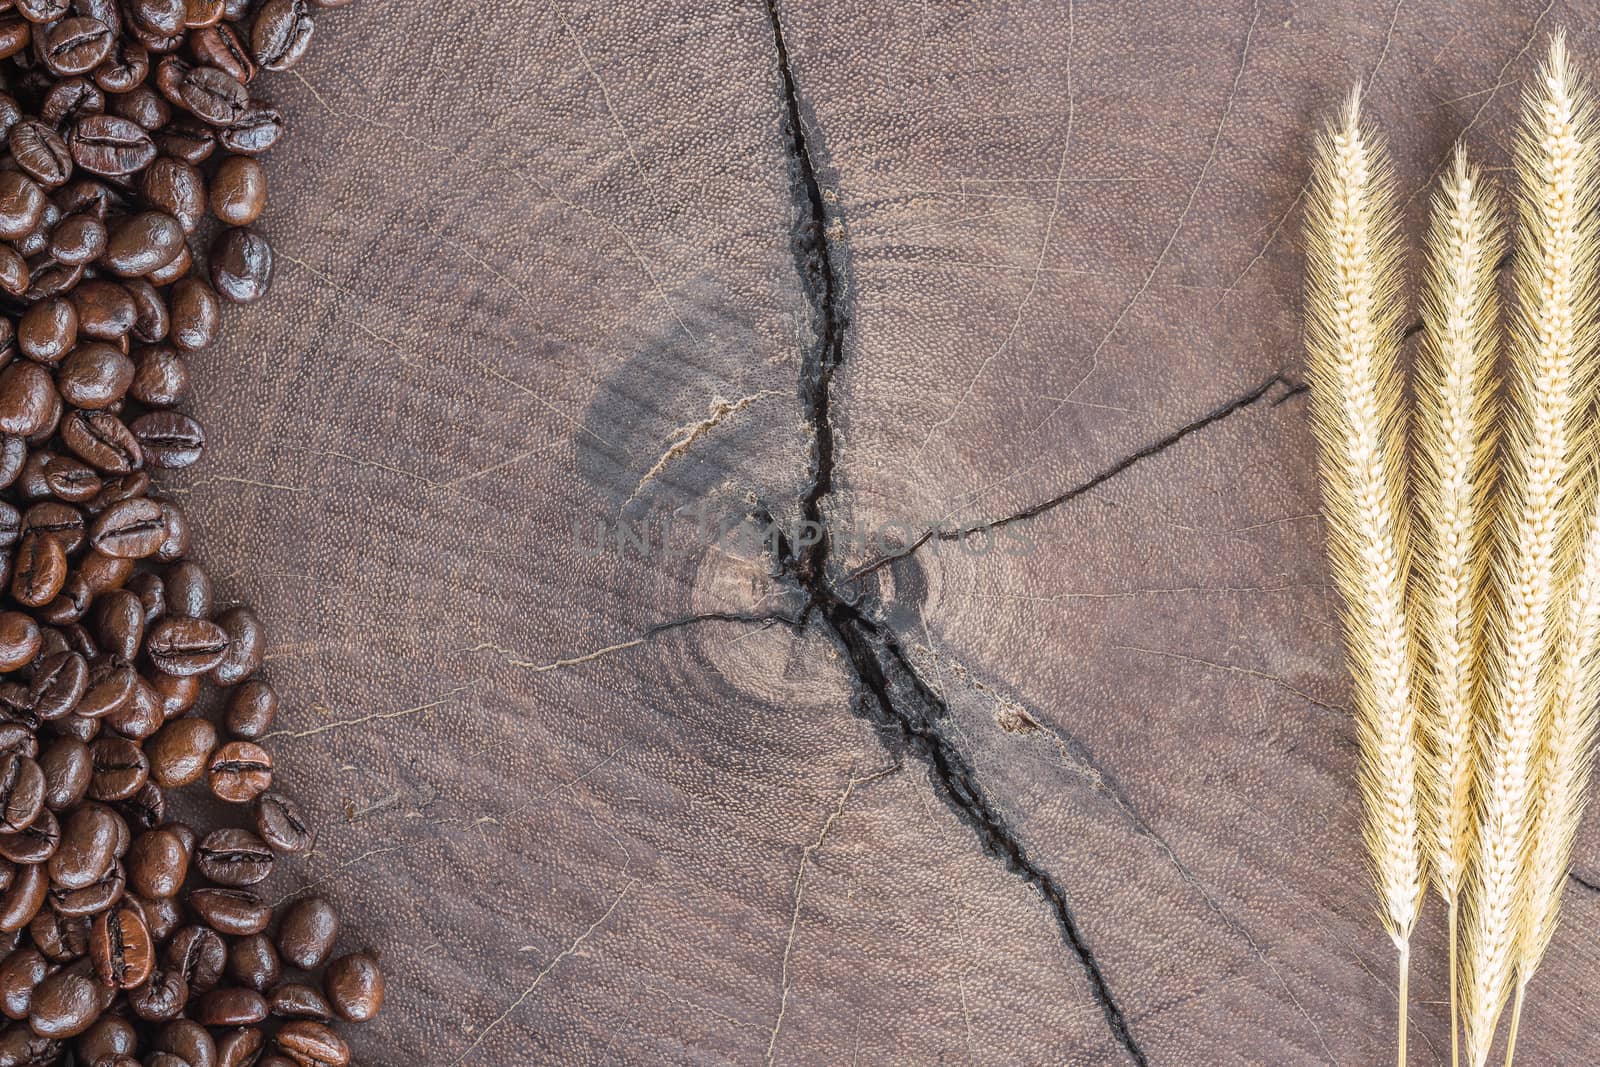 close up coffee beans on wood stump background